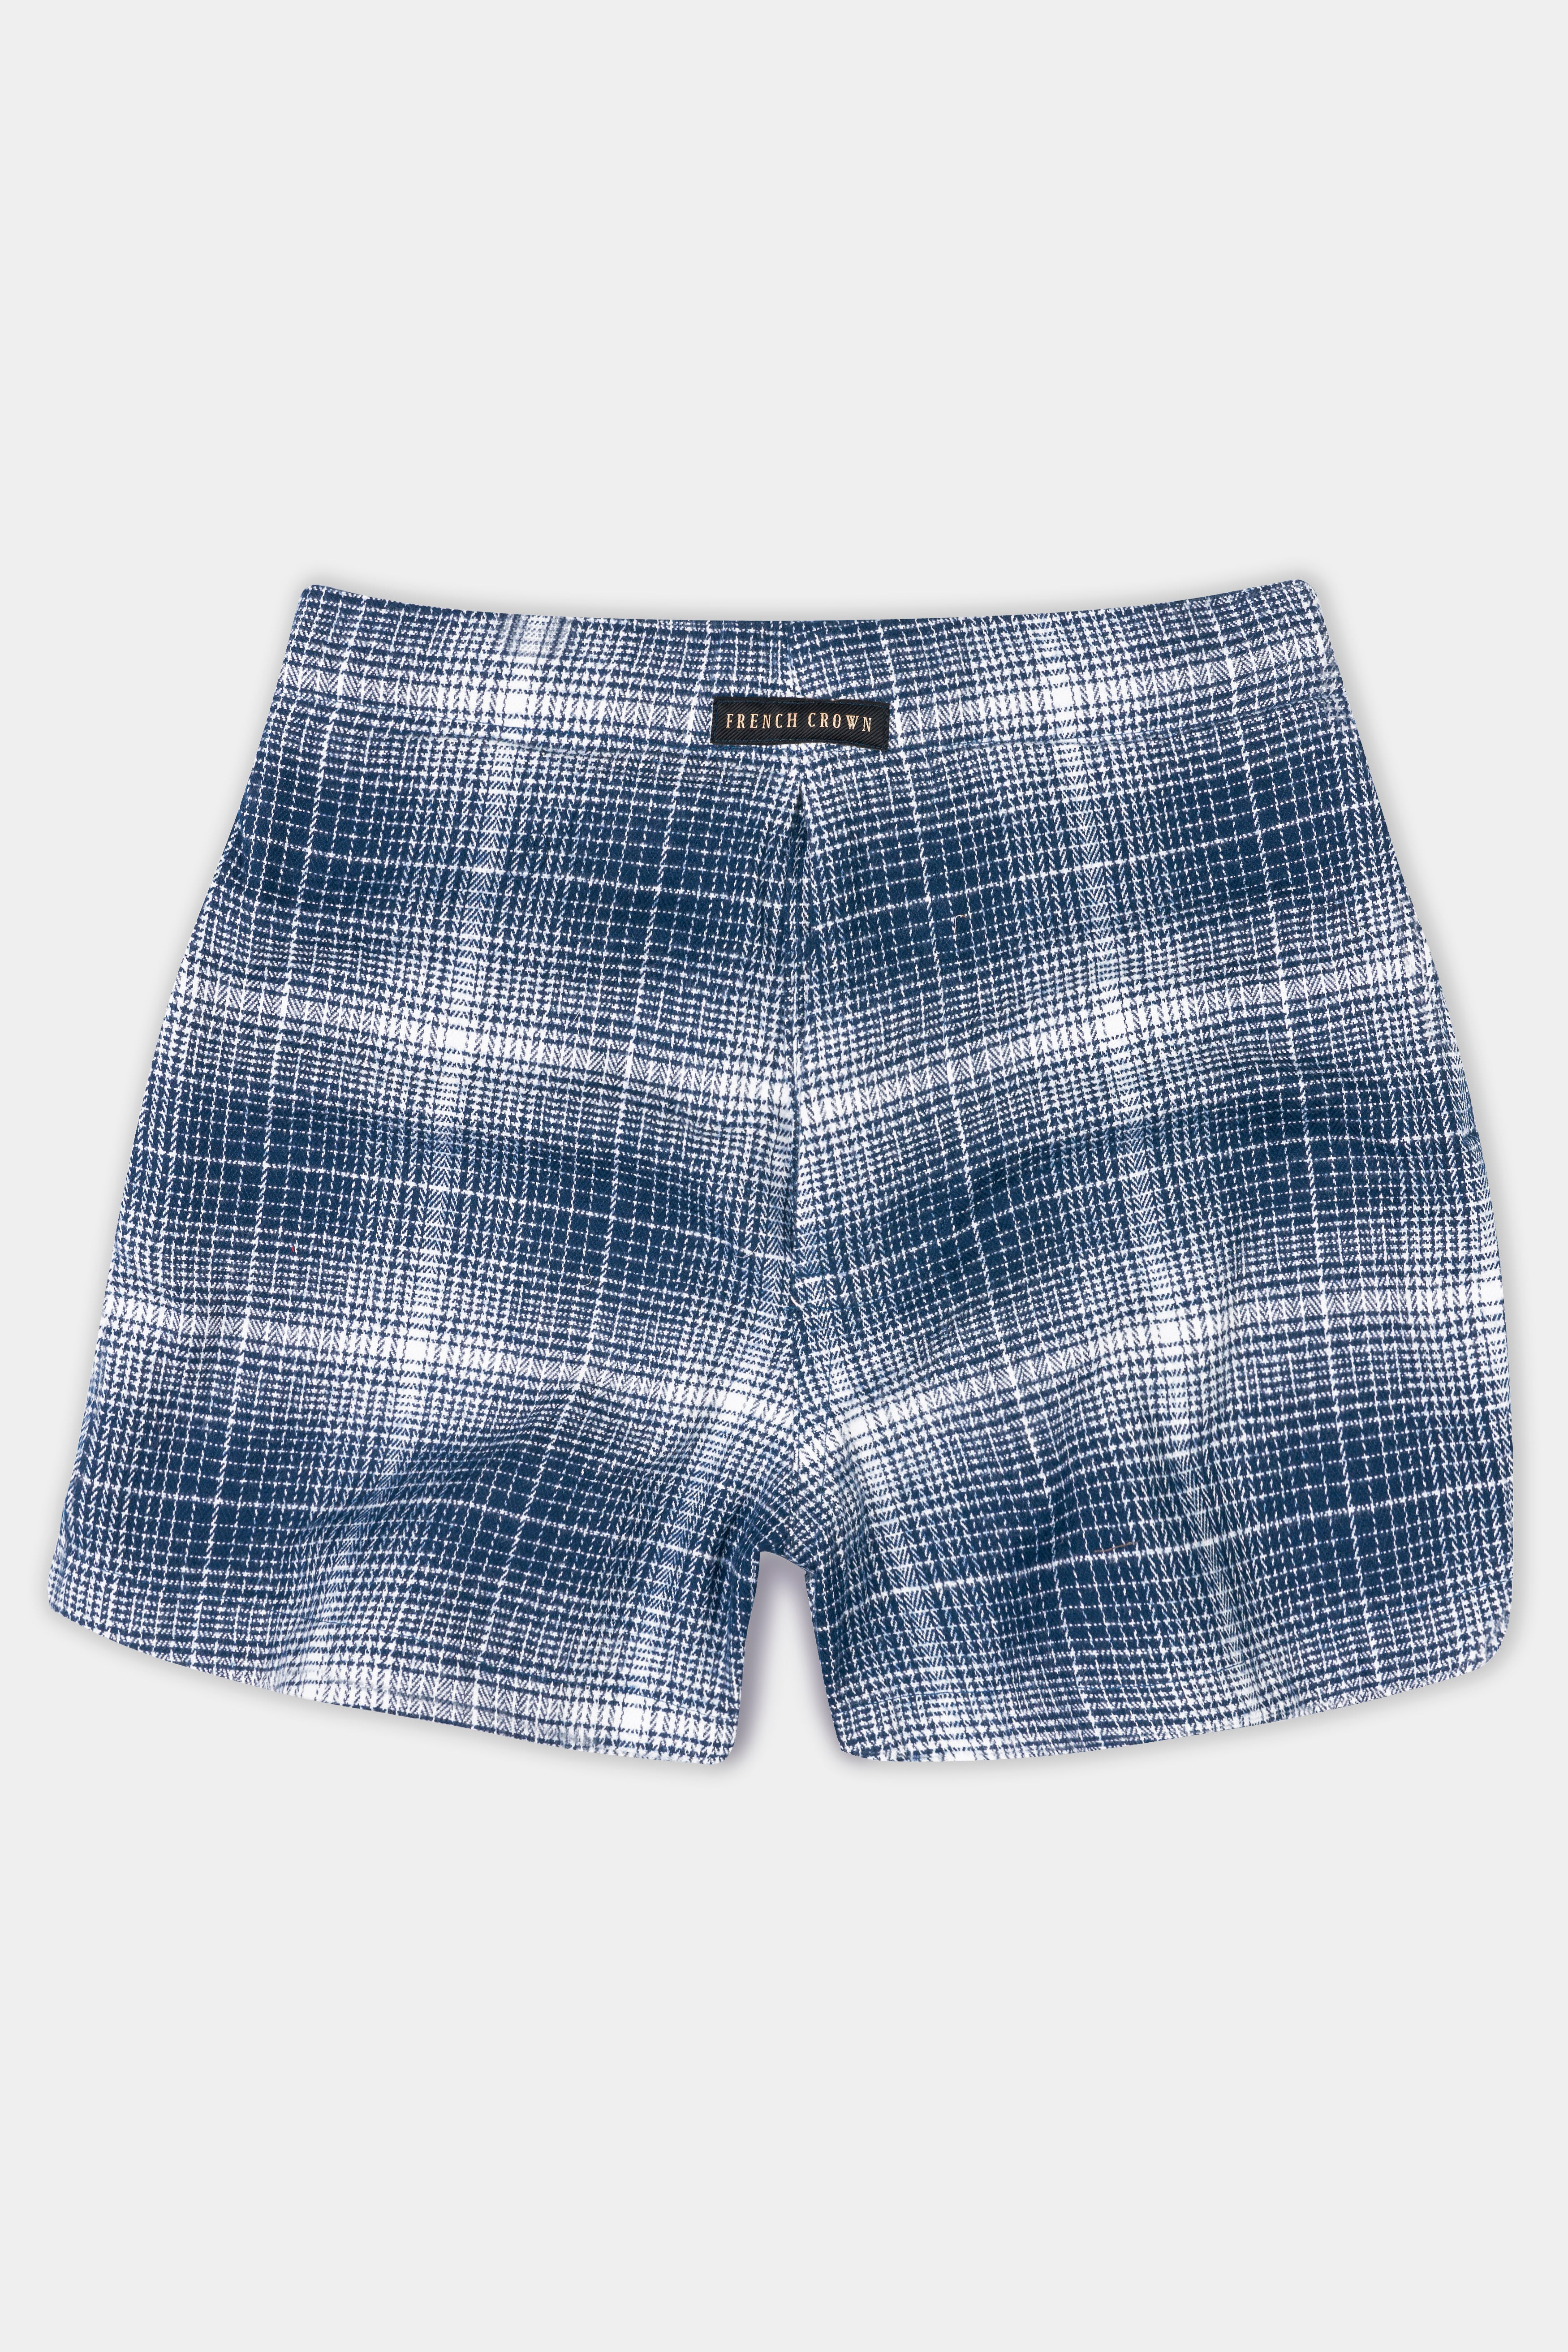 Rhino Blue With White Checkered Flannel Premium Cotton Boxer BX562-28, BX562-30, BX562-32, BX562-34, BX562-36, BX562-38, BX562-40, BX562-42, BX562-44